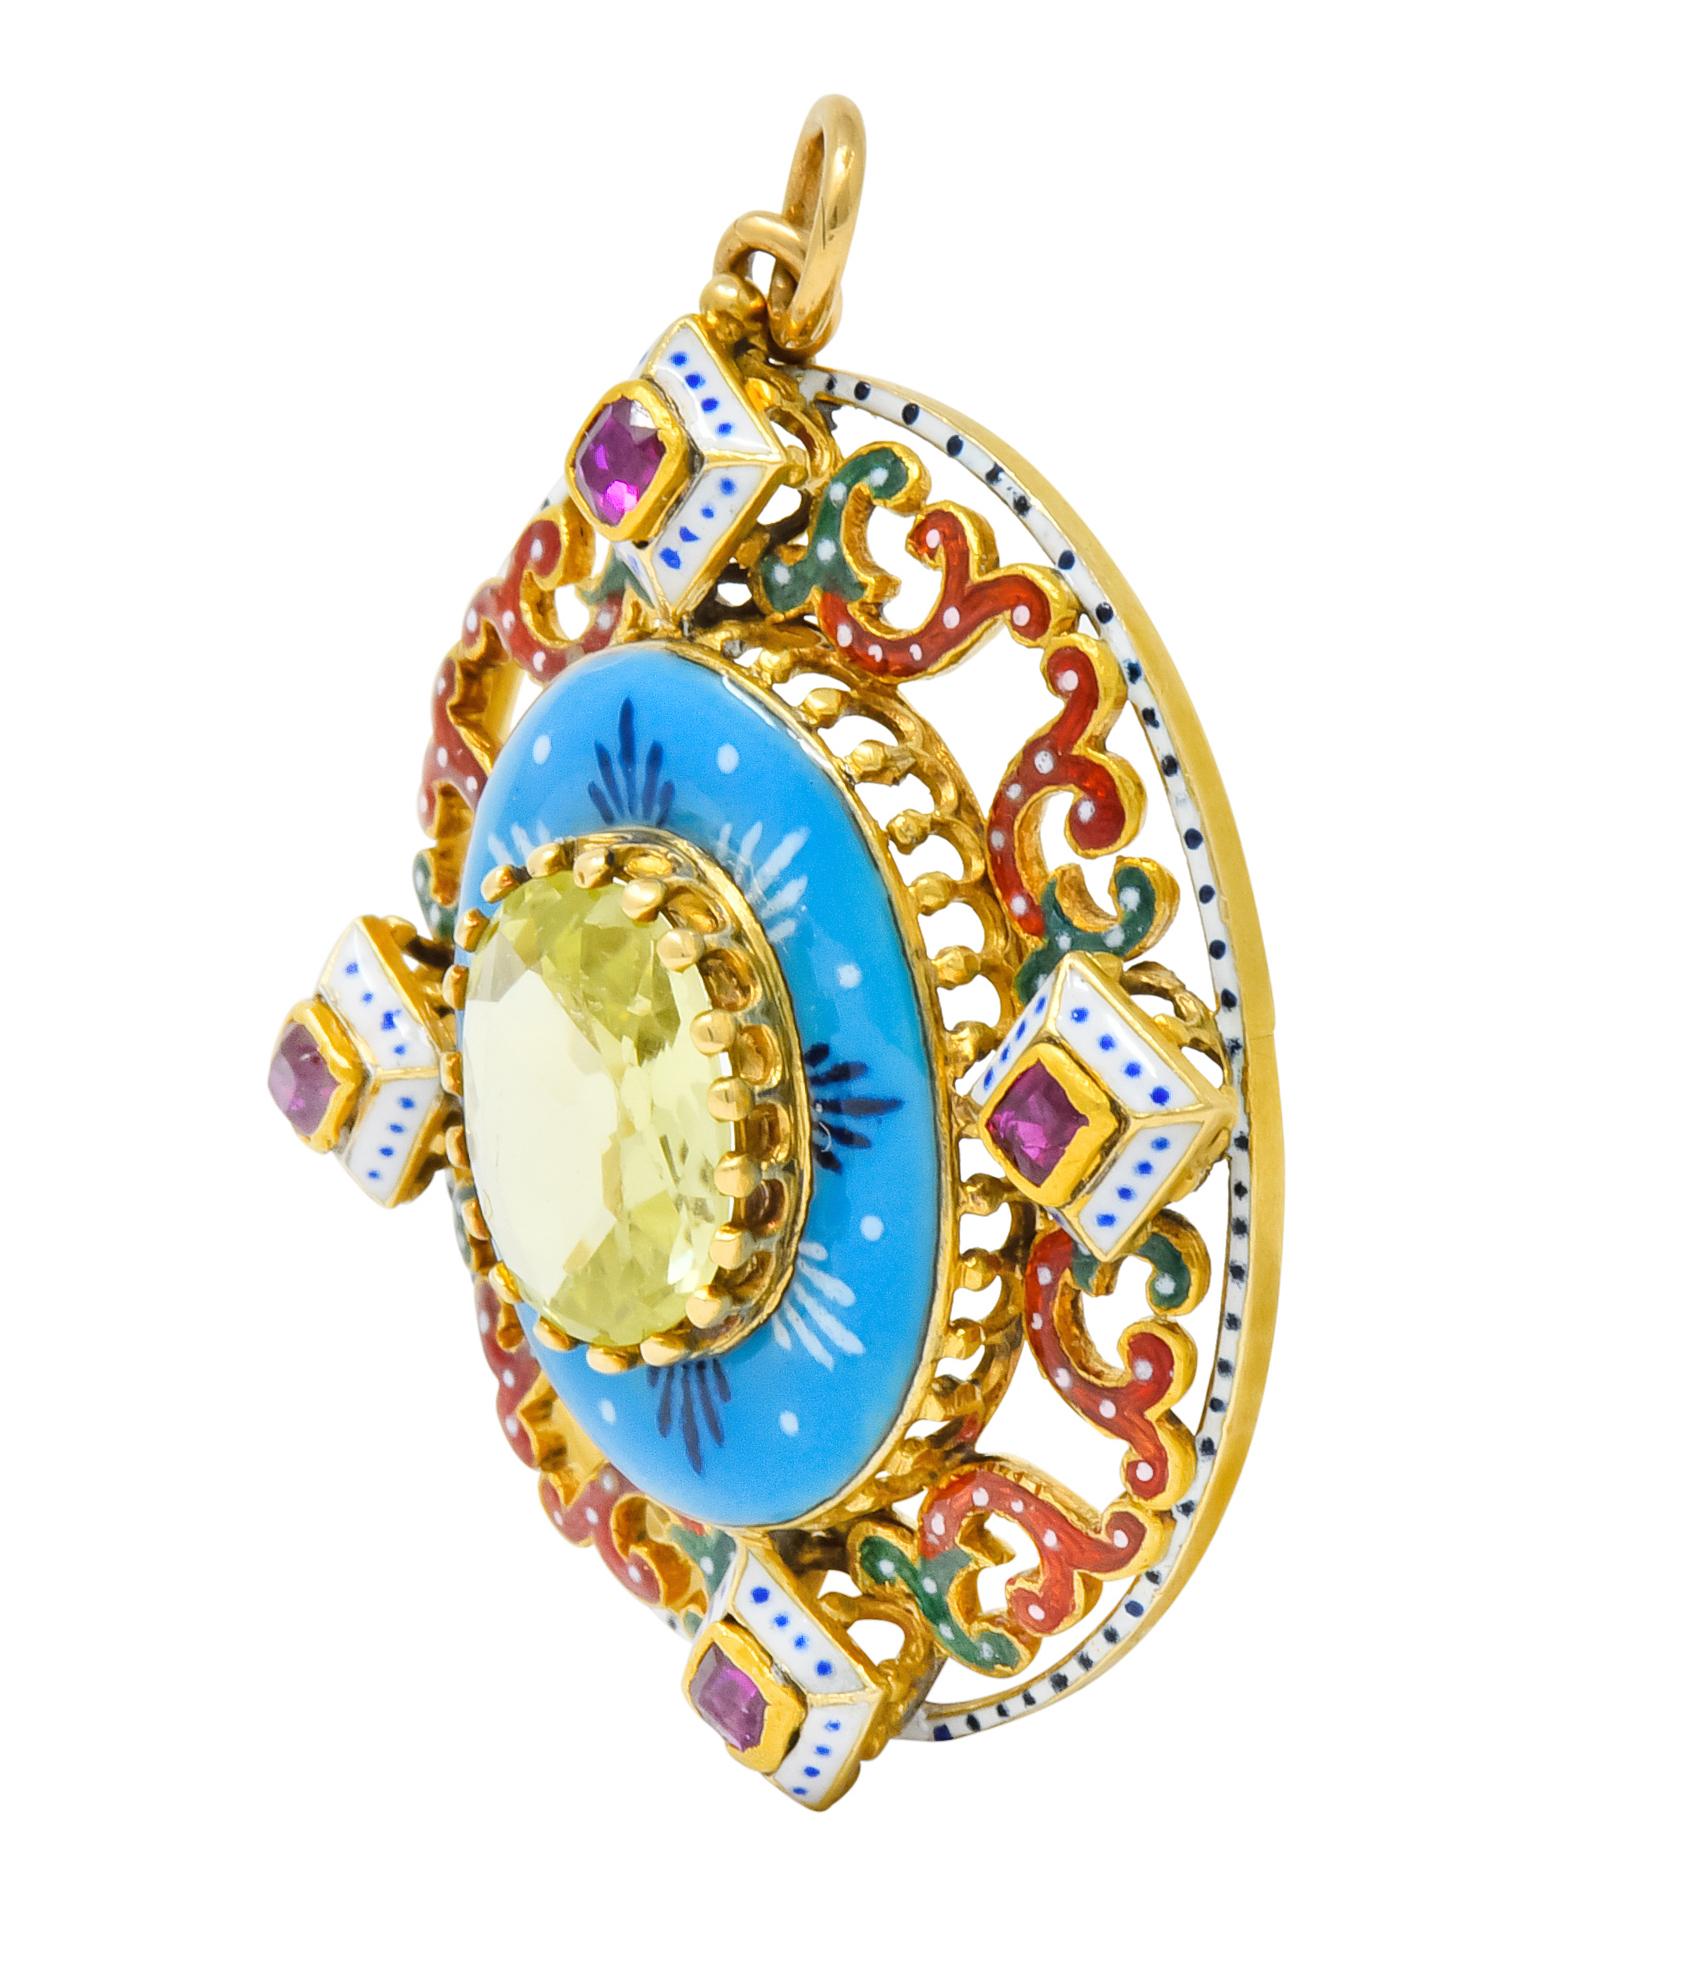 Centering an oval cut chrysoberyl measuring approximately 10.5 x 8 mm, transparent and a light yellowish-green color

Surrounded by four cushion cut rubies, at each cardinal point, transparent and a saturated violetish-red in color

All set in a